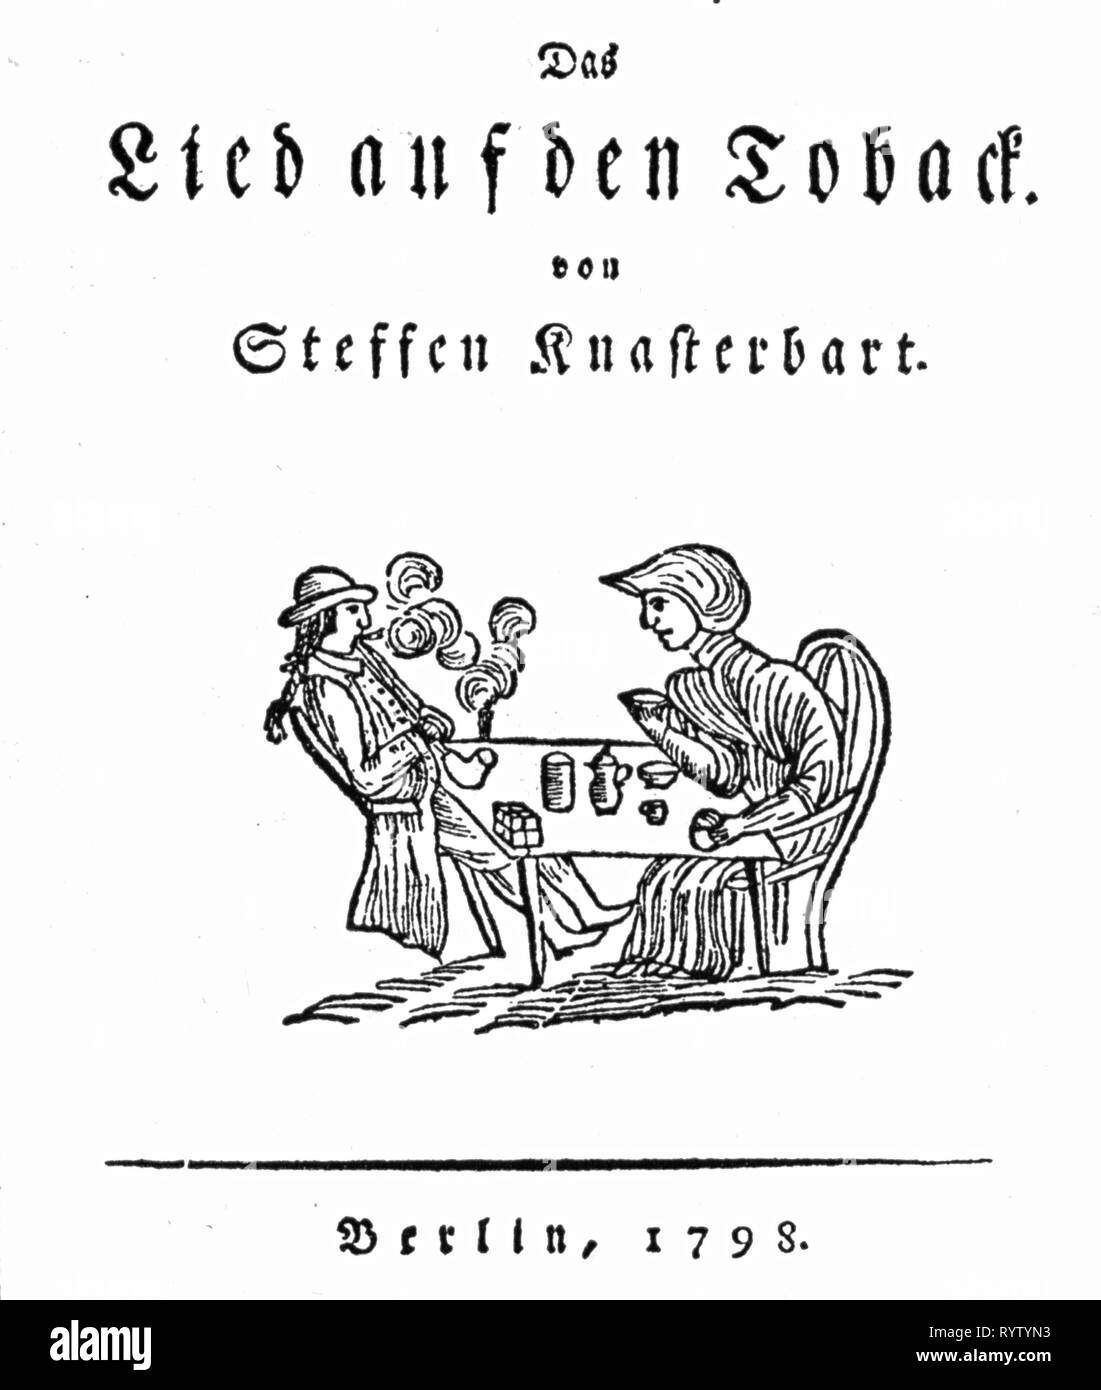 tobacco, caricature, Song on the Tobak, by Steffen Knasterbart, cover, copper engraving, Berlin, 1798, Additional-Rights-Clearance-Info-Not-Available Stock Photo